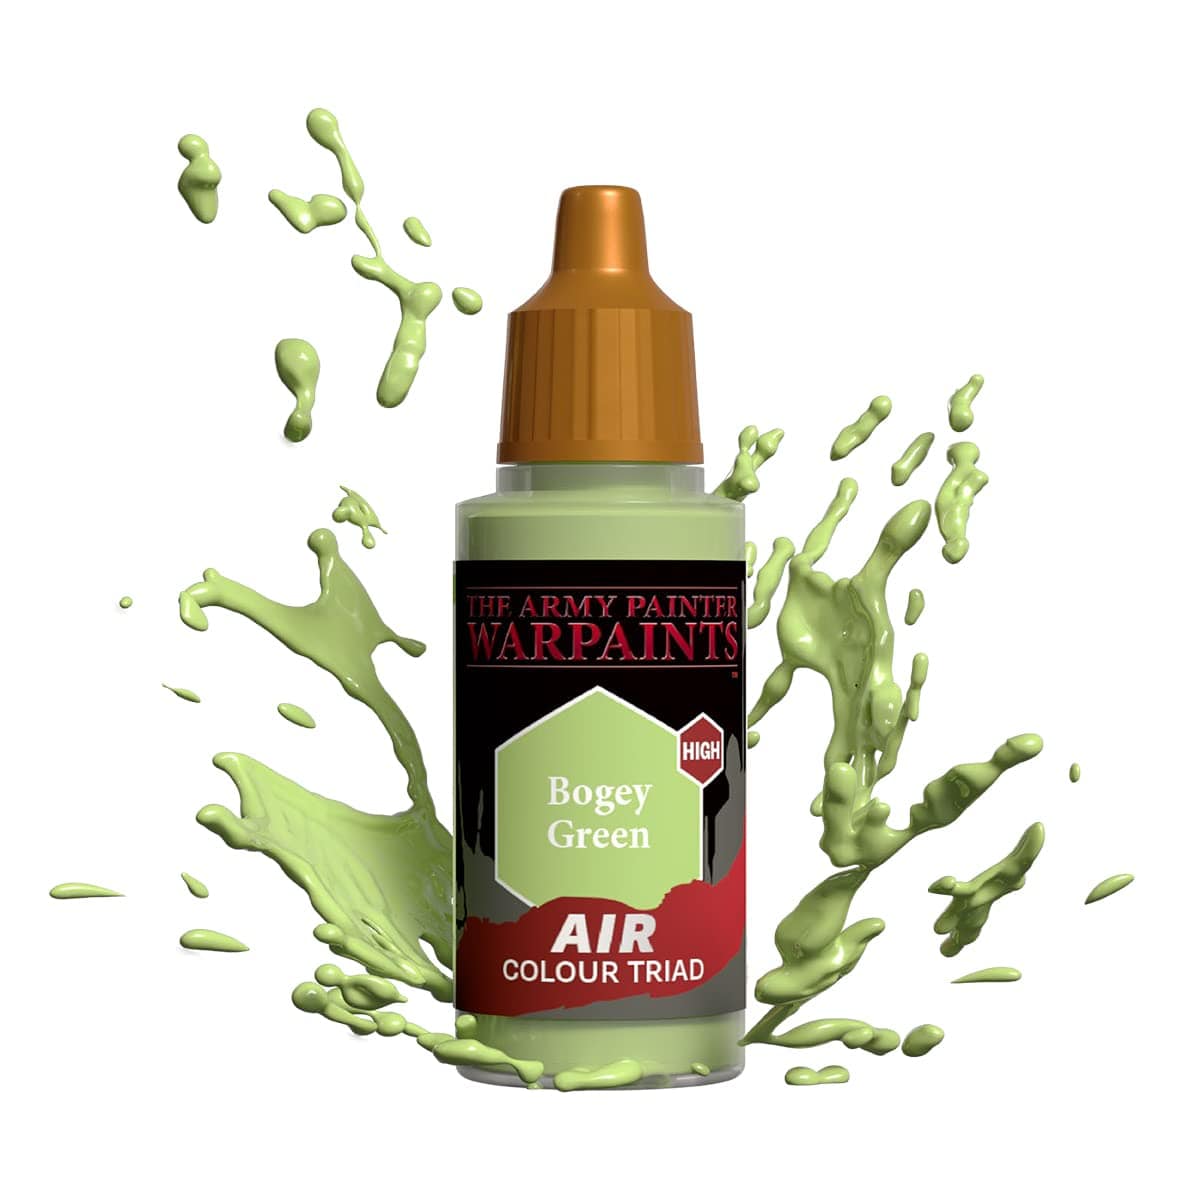 The Army Painter Accessories The Army Painter Warpaints Air: Bogey Green 18ml